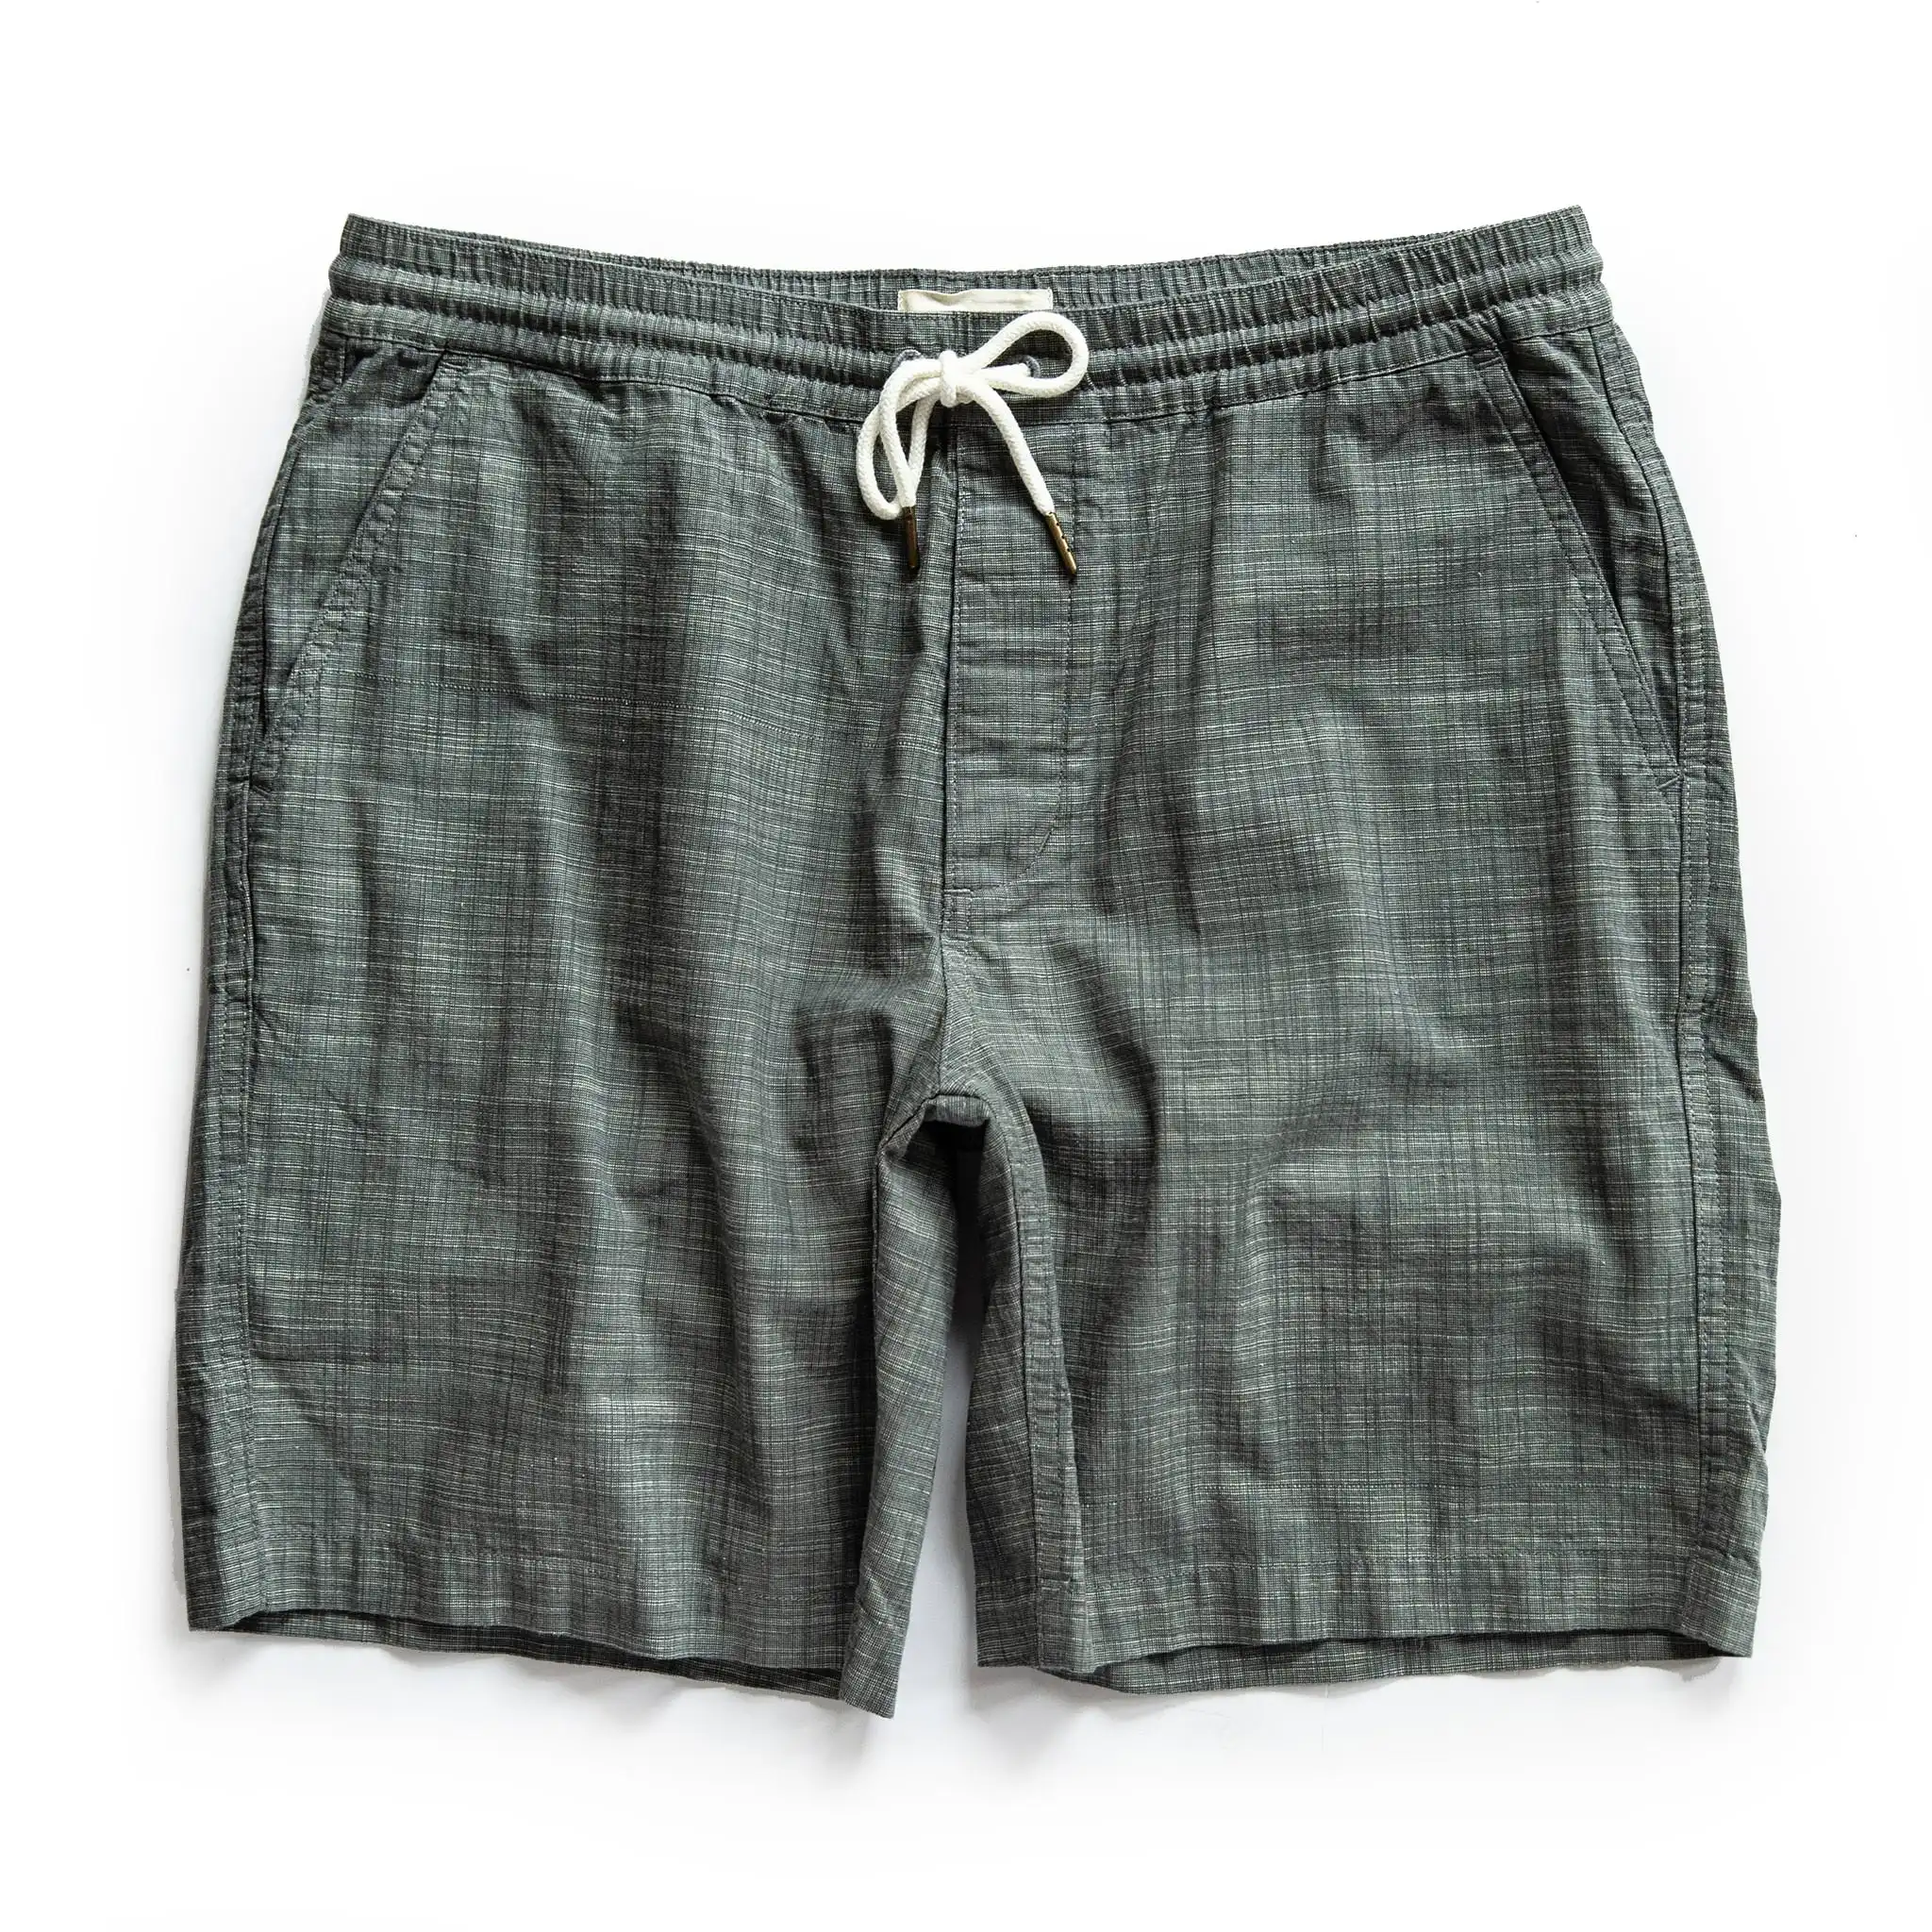 Taylor Stitch Apres Shorts in Olive Pin Dot